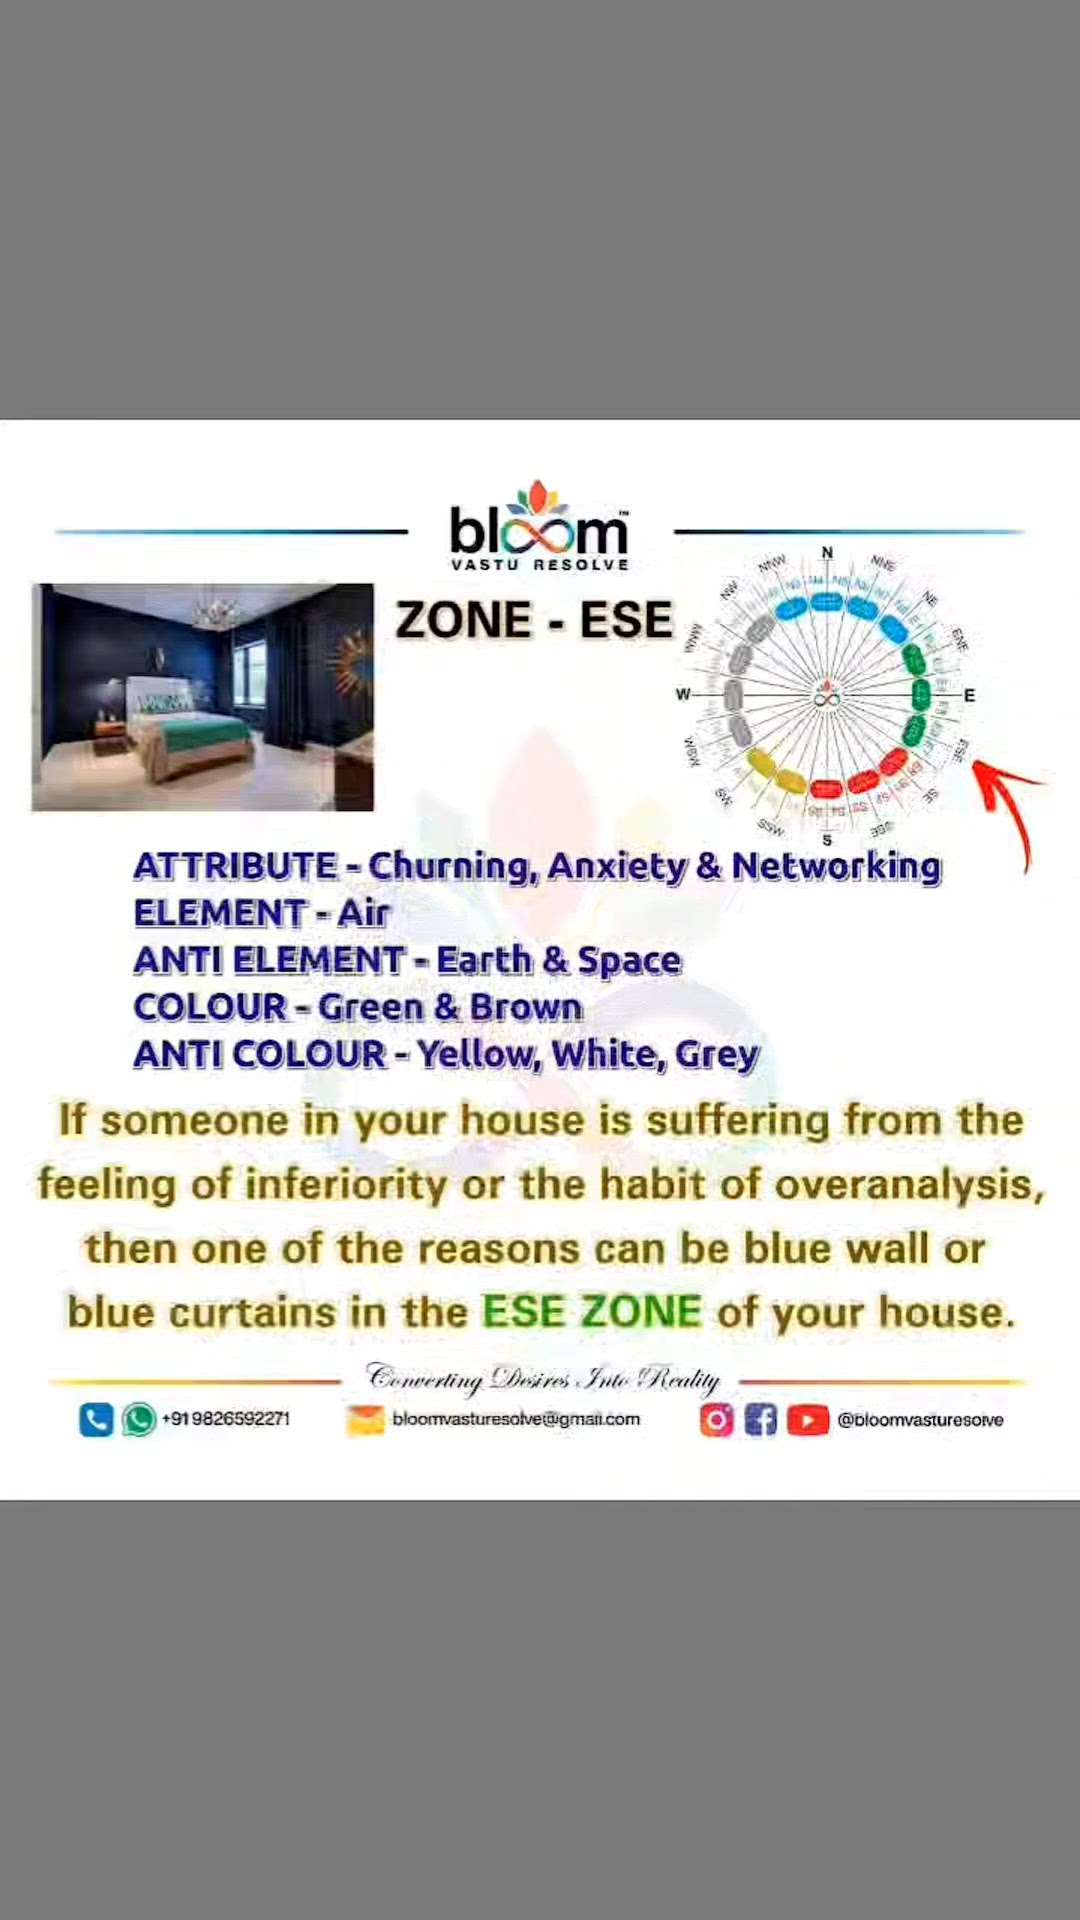 Your queries and comments are always welcome.
For more Vastu please follow @bloomvasturesolve
on YouTube, Instagram & Facebook
.
.
For personal consultation, feel free to contact certified MahaVastu Expert through
M - 9826592271
Or
bloomvasturesolve@gmail.com
#vastu #वास्तु #mahavastu #mahavastuexpert #bloomvasturesolve  #vastureels #vastulogy #vastuexpert  #vasturemedies  #vastuforhome #vastuforpeace #vastudosh #numerology #vastuforgrowth #numerology #esezone #anxiety #wallpainting #wallpaper #lowconfidence